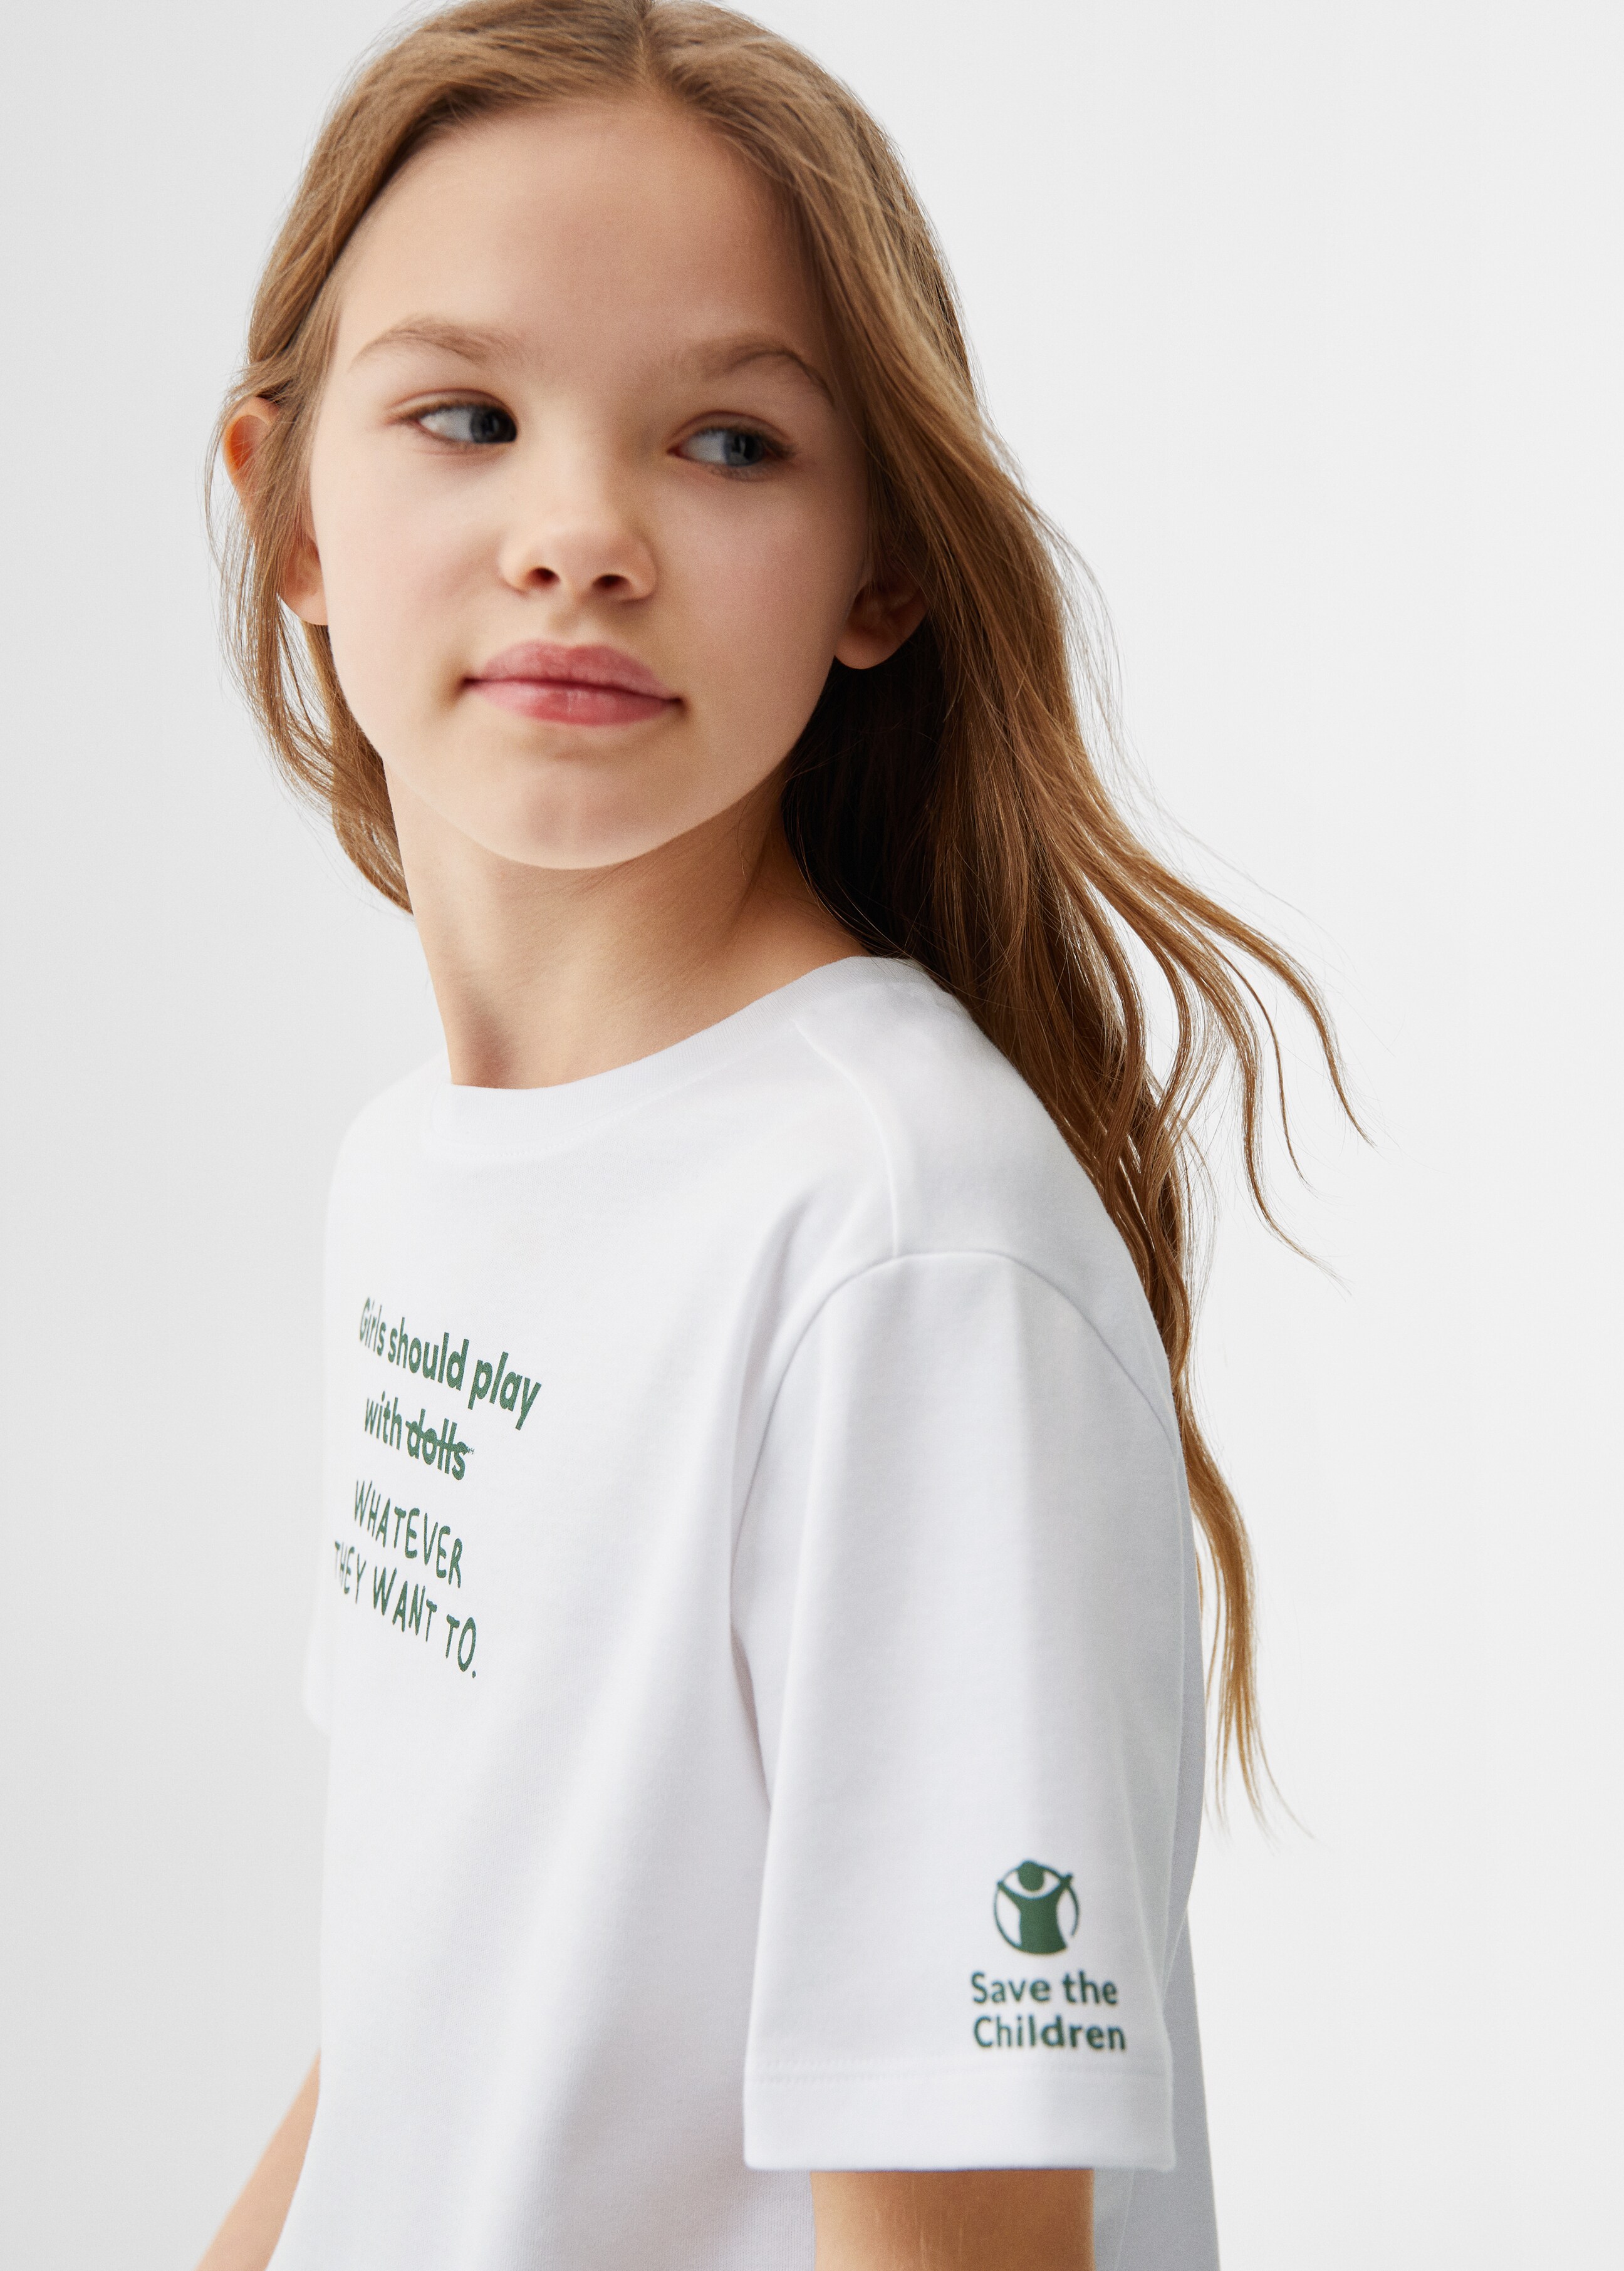 Women's Day t-shirt / KIDS - Details of the article 1